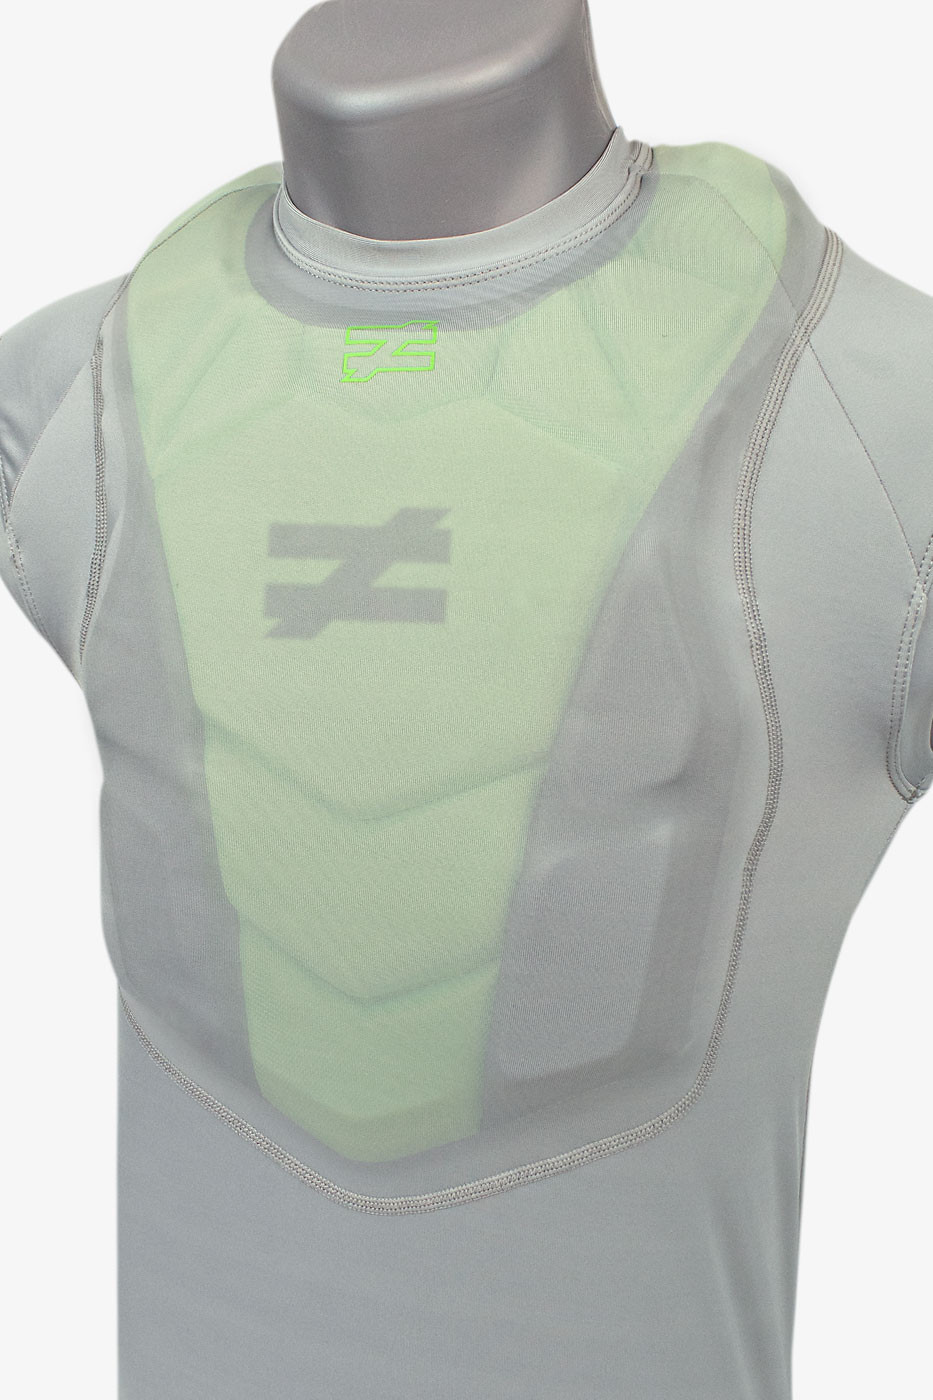 Shop Chest Protectors & Padded Compression Shirts